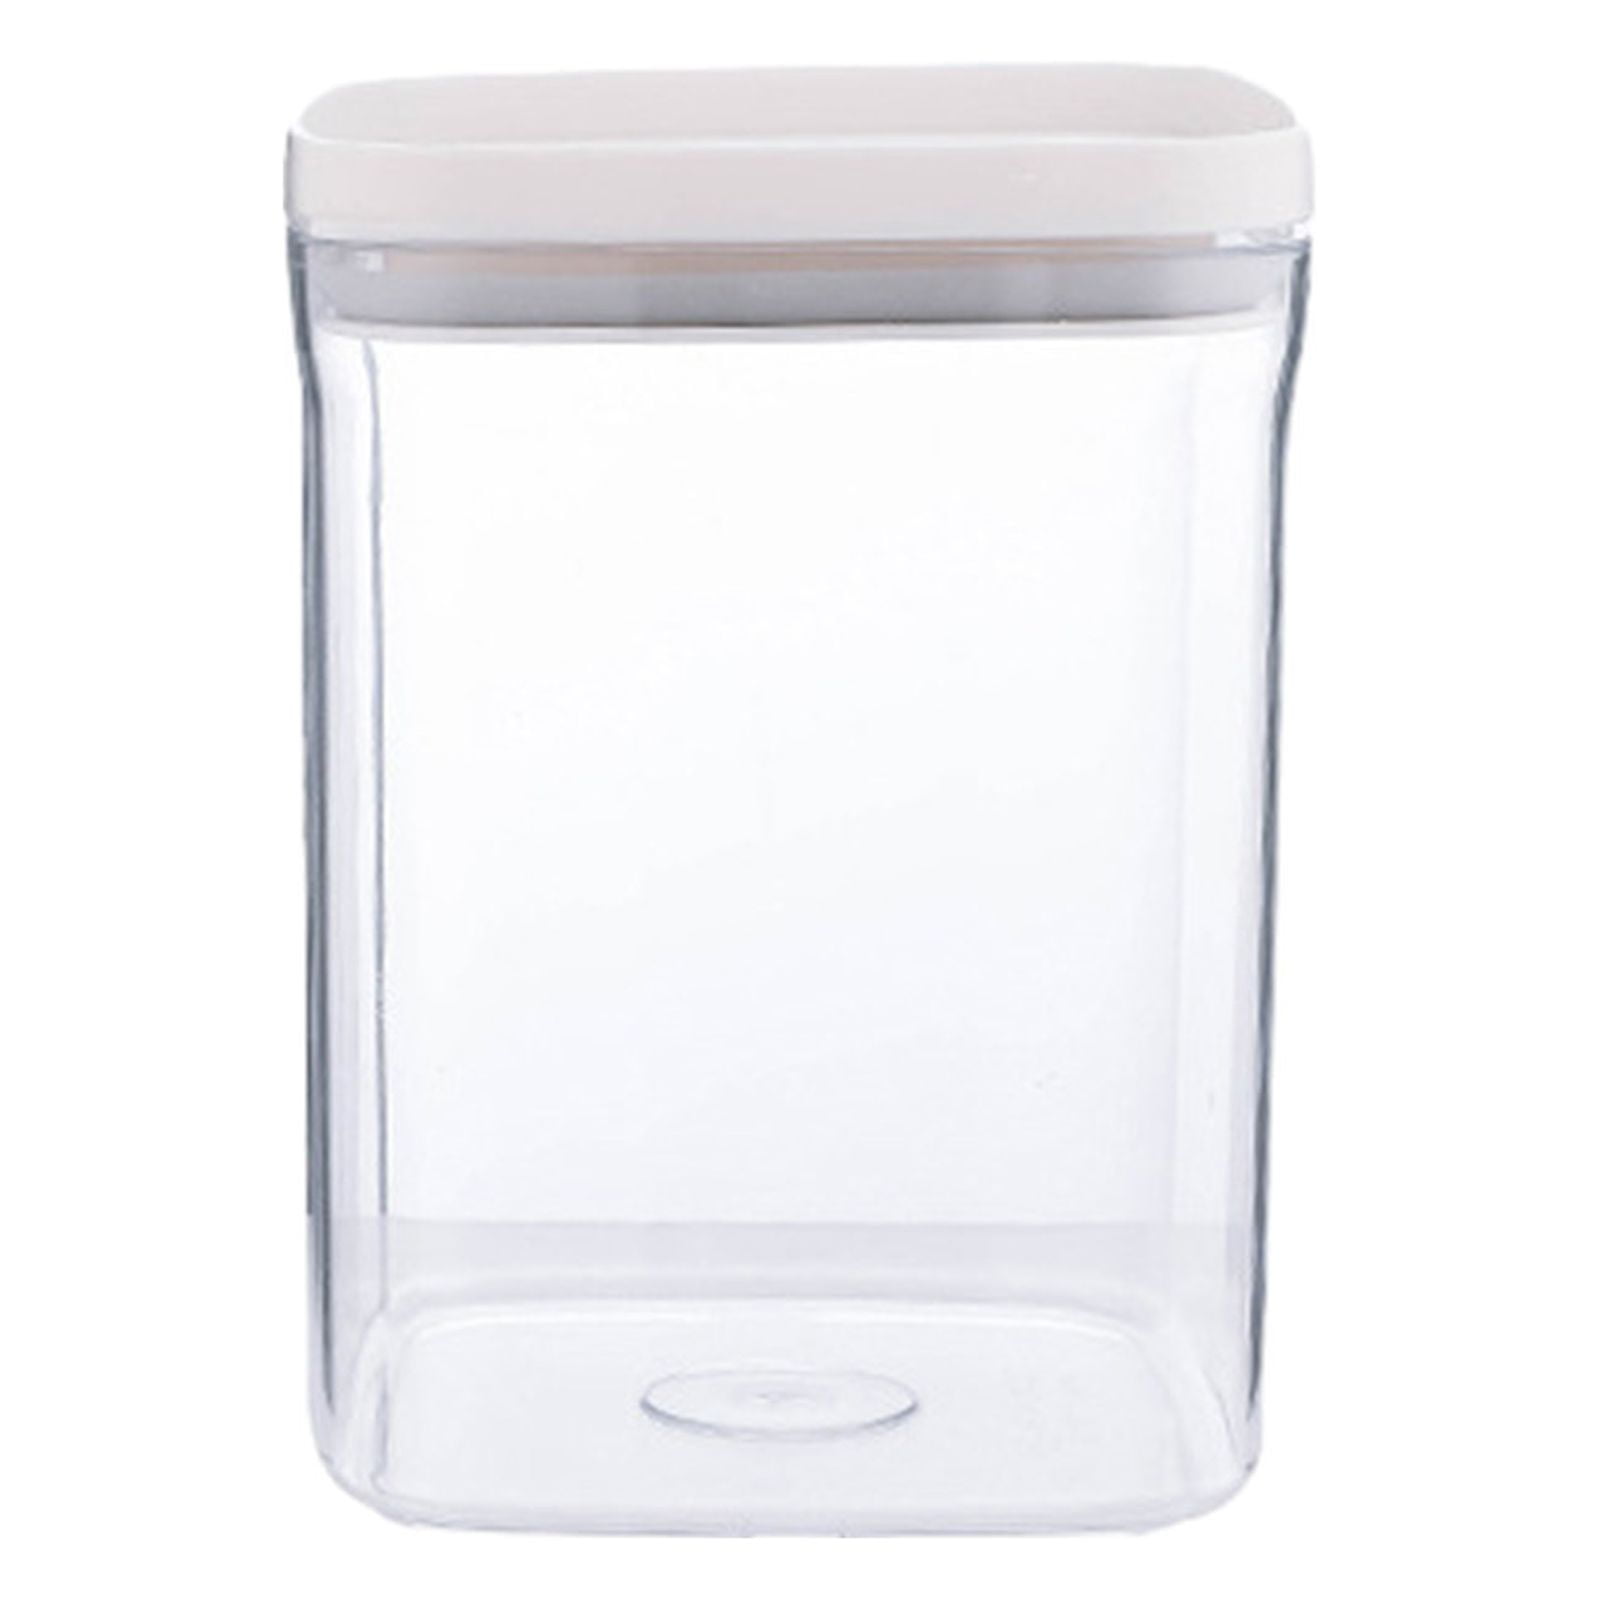 Superb Quality push button food storage containers With Luring Discounts 